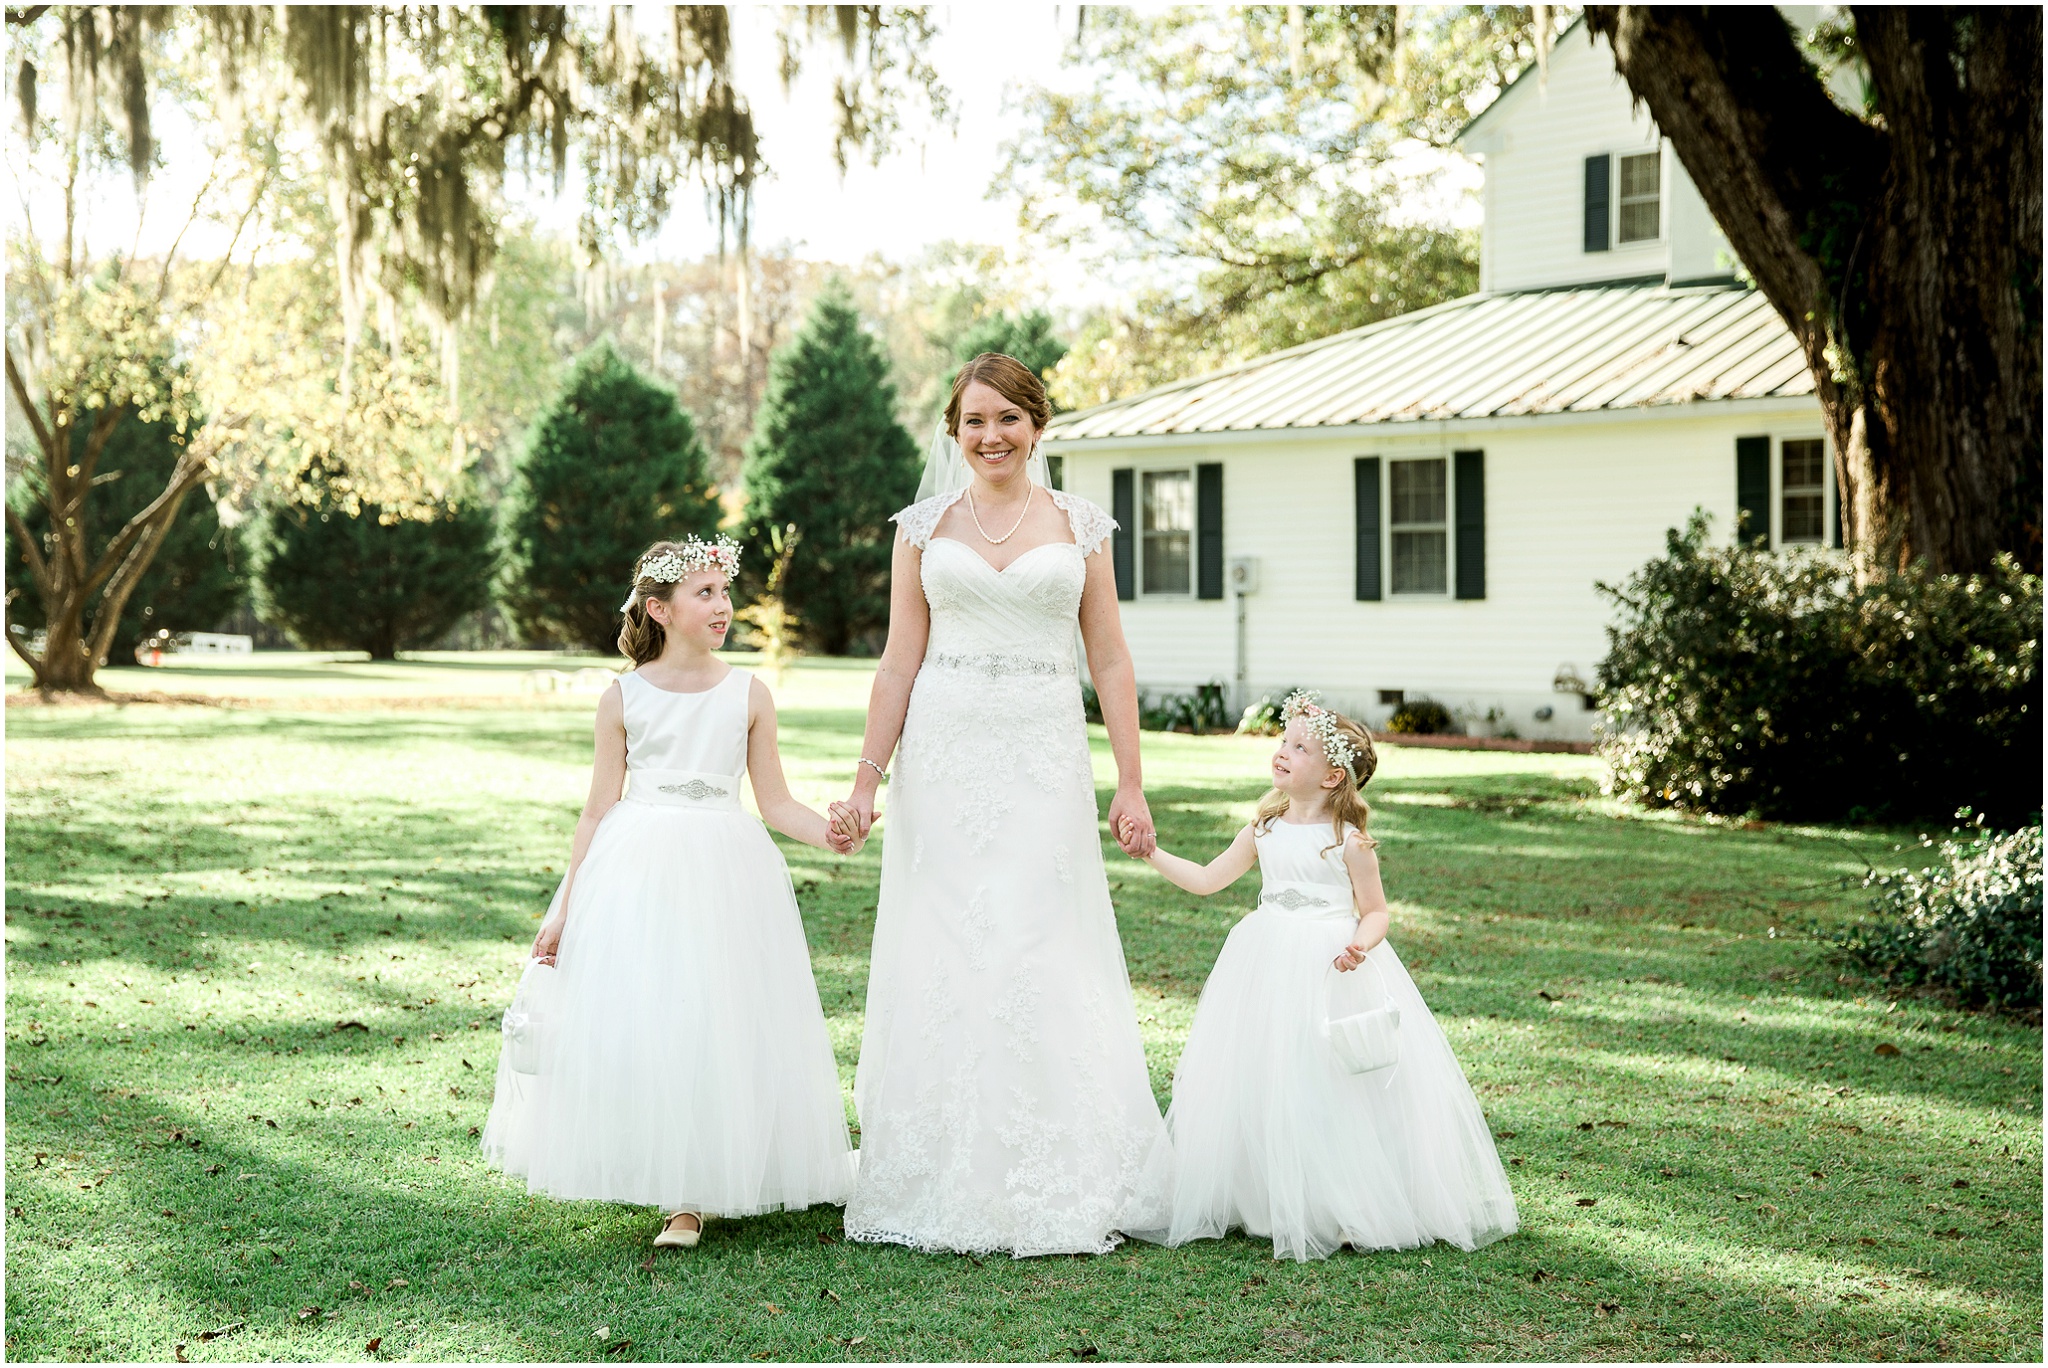 Paige aand the flower girls under the willow on the lawn in white, Upper Mill Plantation Wedding Session 1, Conway, South Carolina, Wedding coordinator, flowers and Cake - Willow Event Designs, Venue - Upper Mill Plantation, DJ - Carolina Entertainment, Dress - Foxy Lady, www.onelifephoto.net Photography